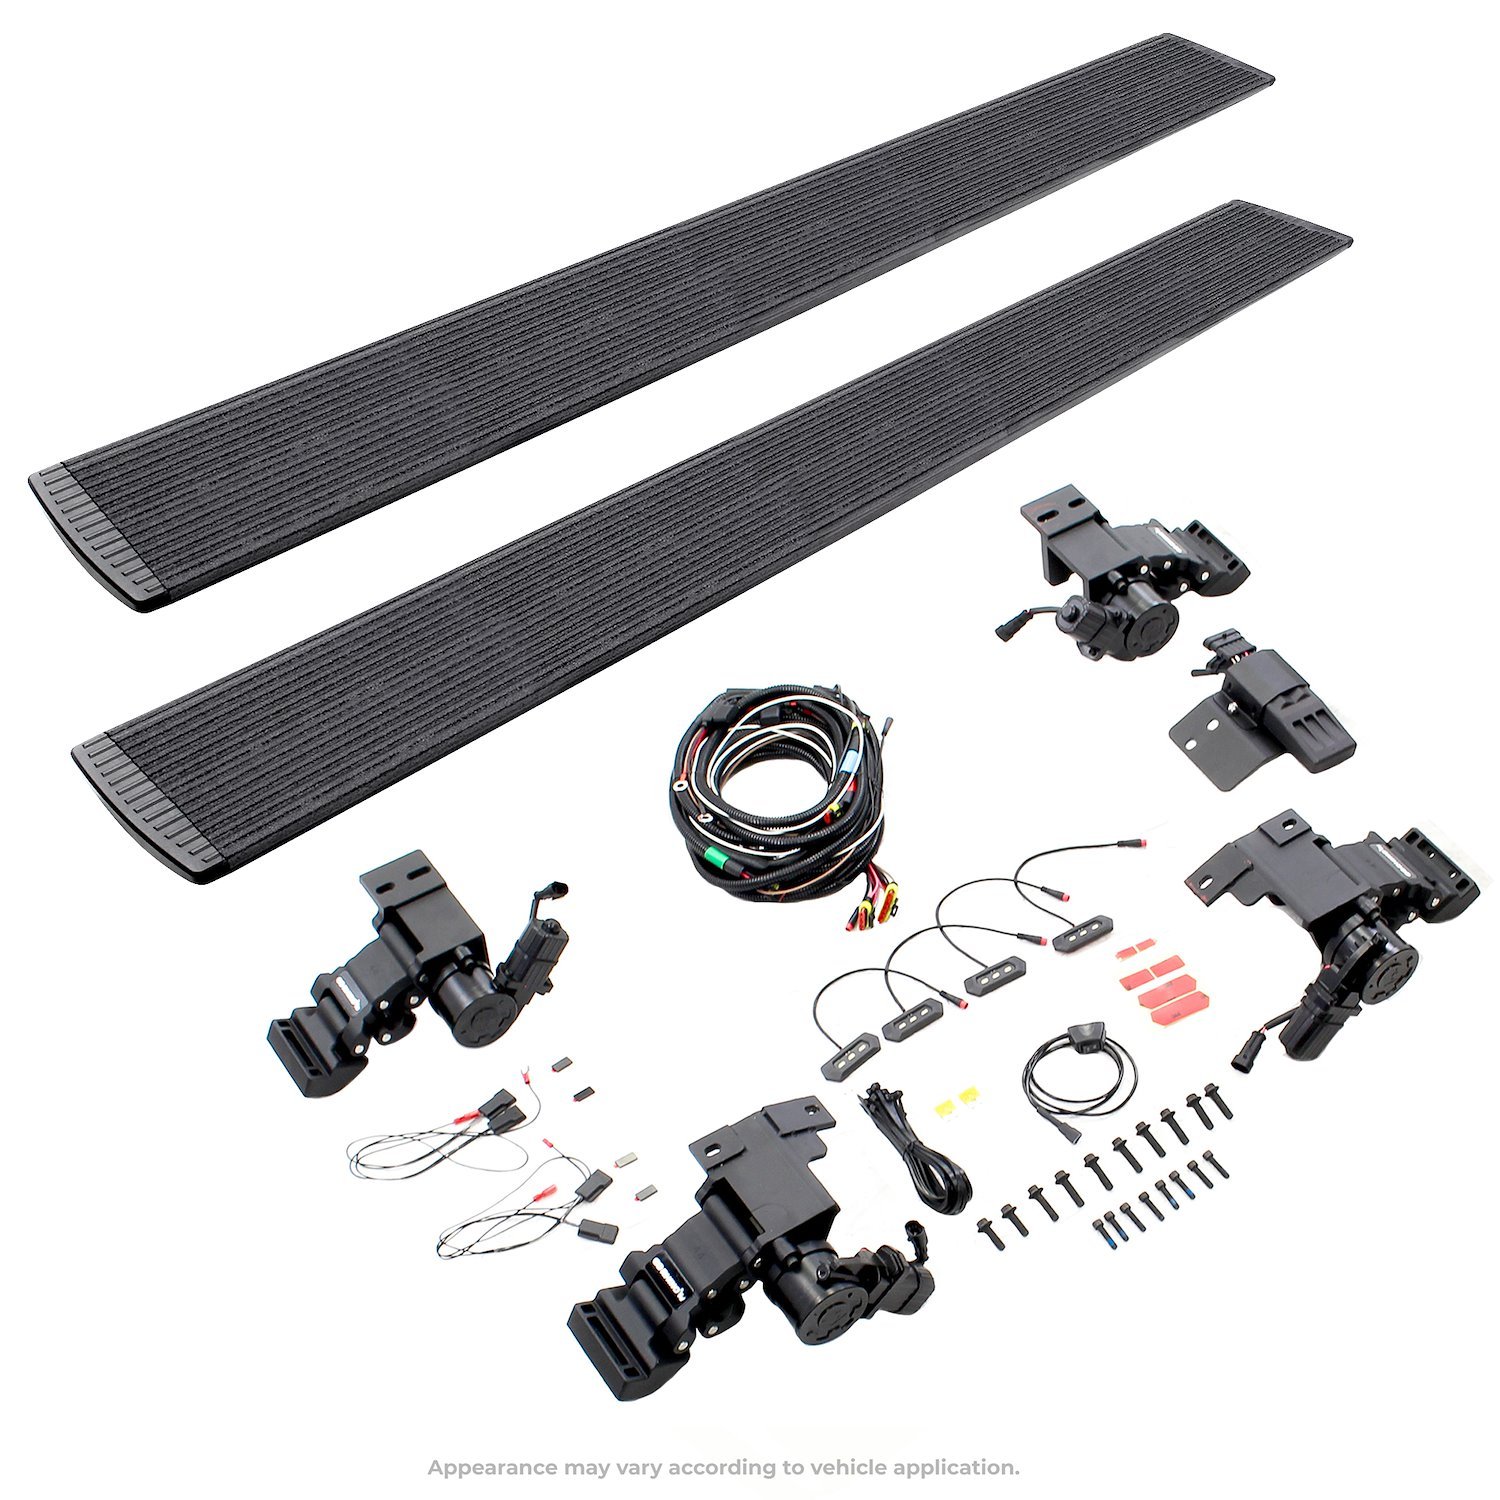 E1 Electric Running Board Kit Fits Select GMC